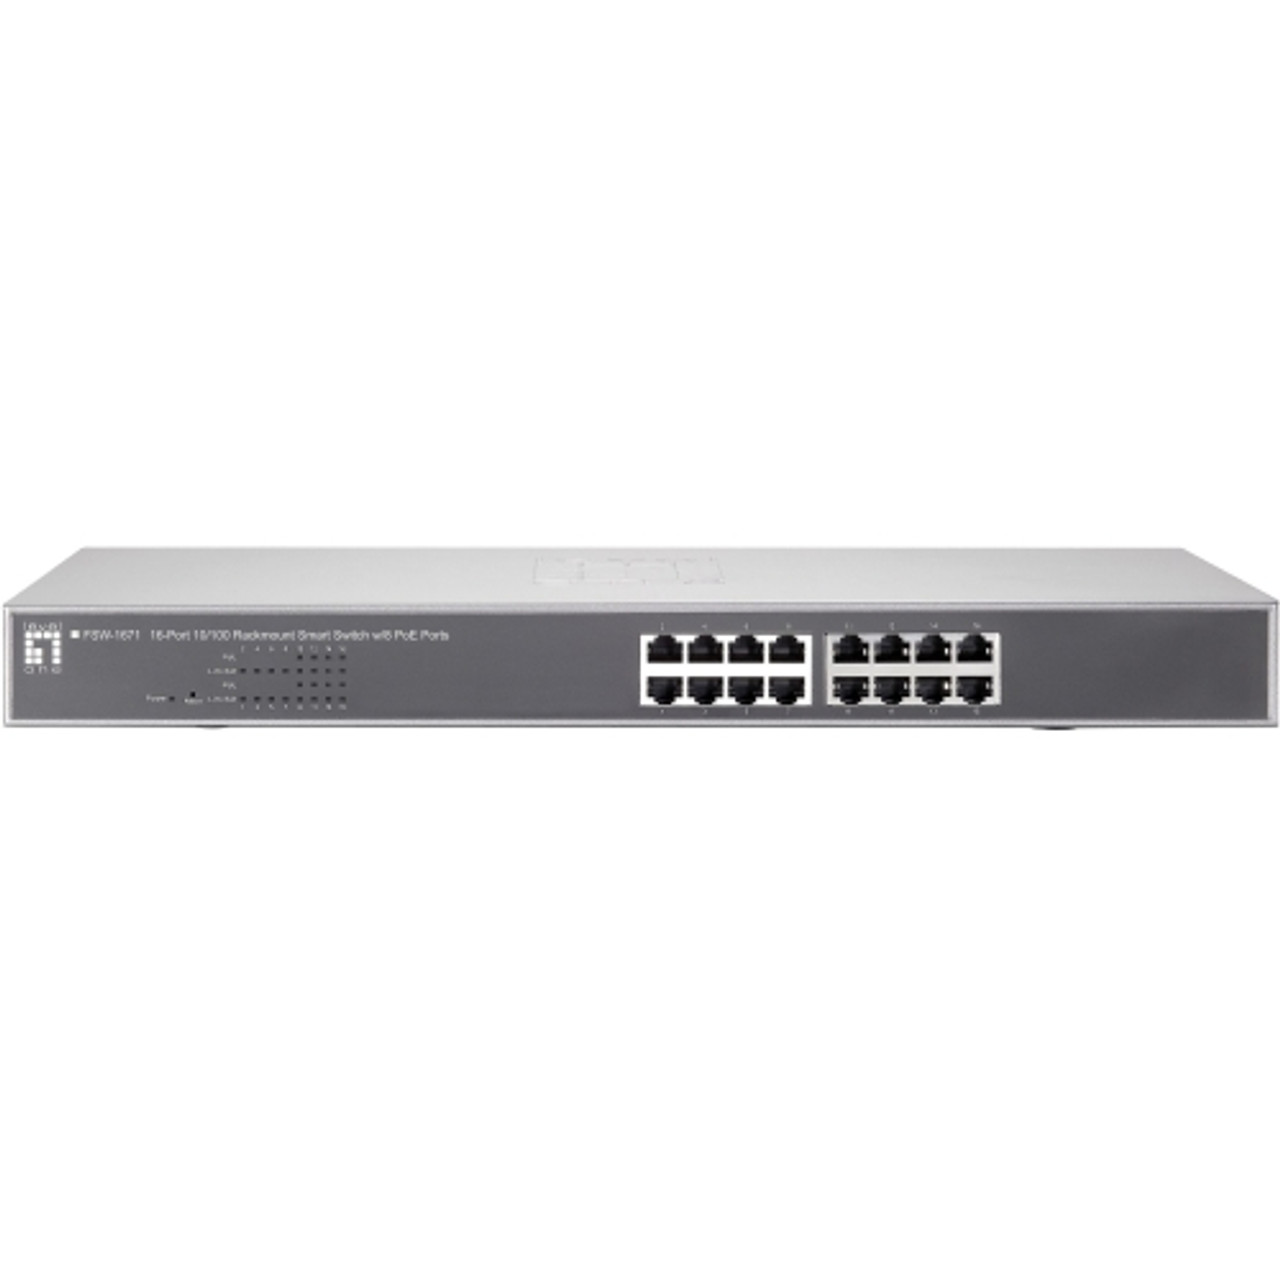 FSW-1671 LevelOne Web Smart 16-Port 10/100 w/8 PoE Ports 19 Rack Mountable Switch 16 x Fast Ethernet Network Manageable 2 Layer Supported (Refurbished)